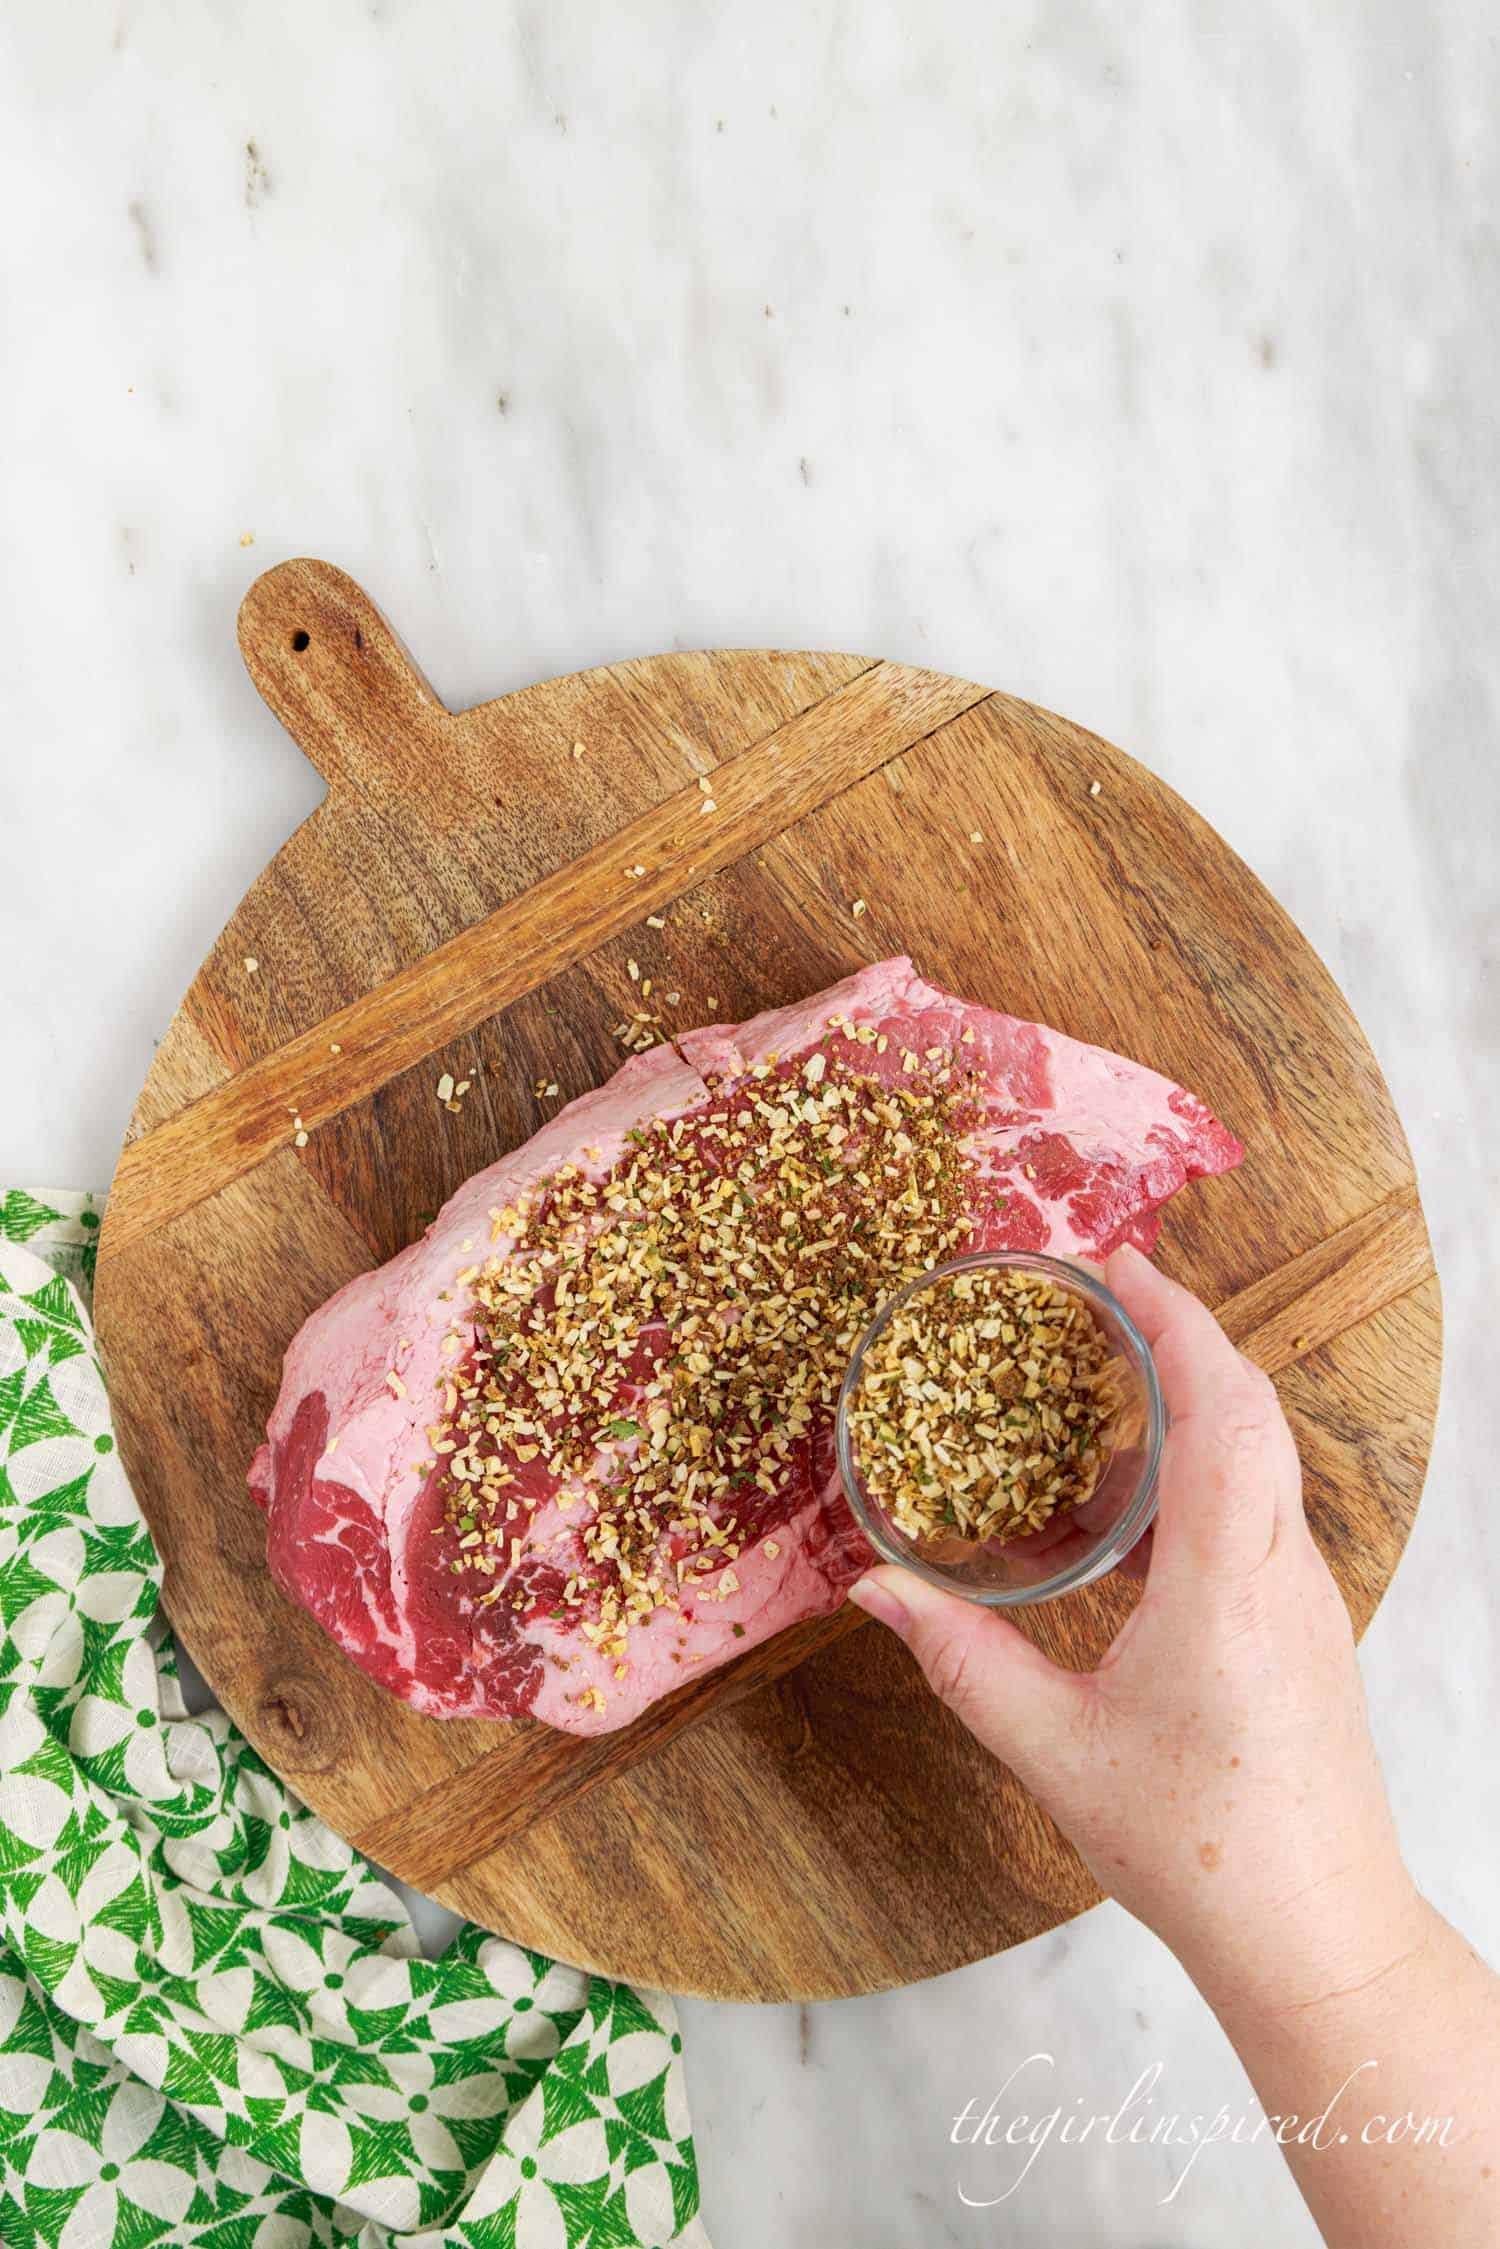 seasoning added to meat on a round wooden cutting board